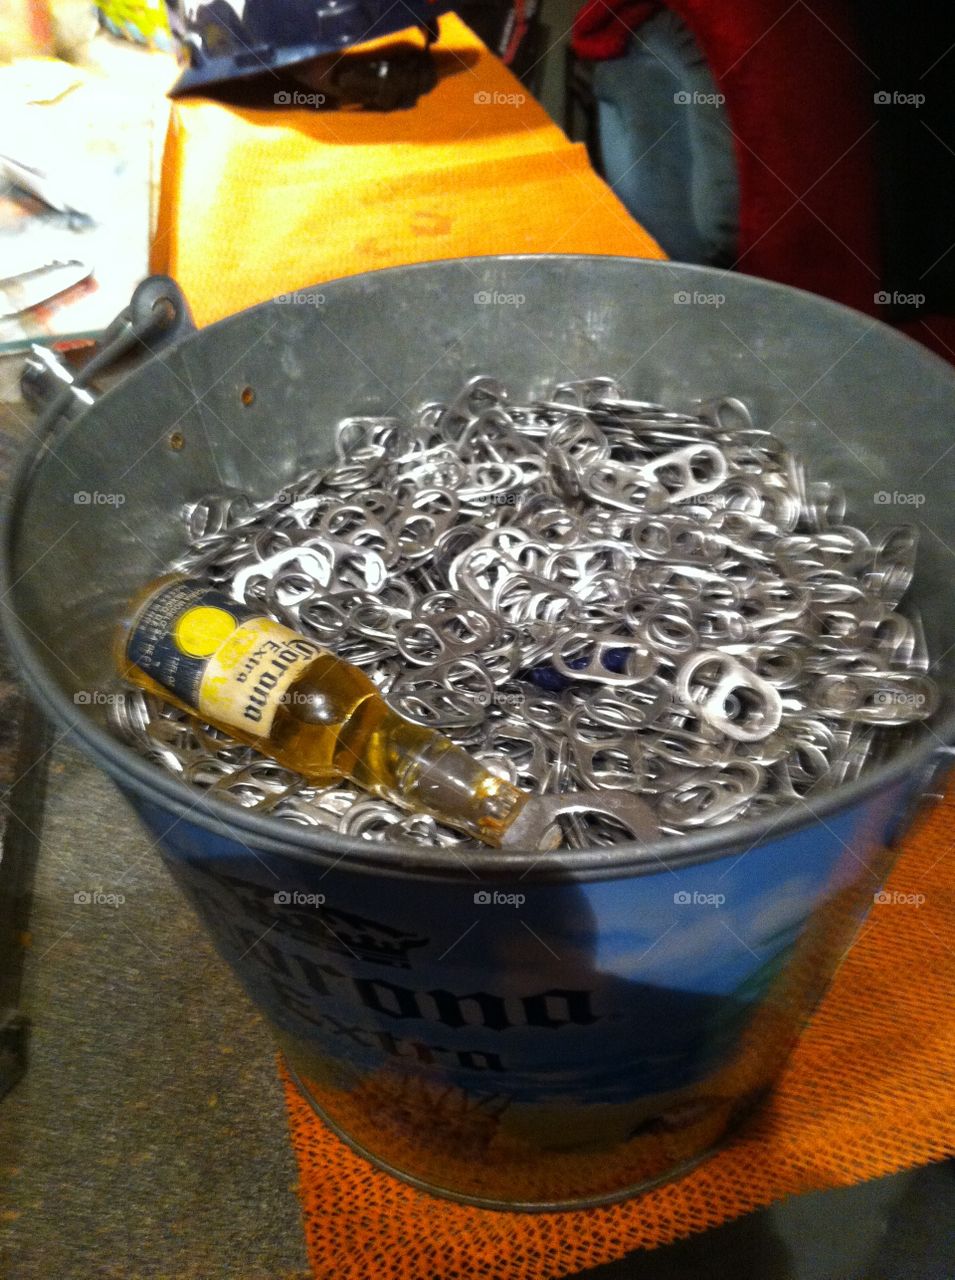 So many beer tabs not from me I wonder who drinks that many beers? 